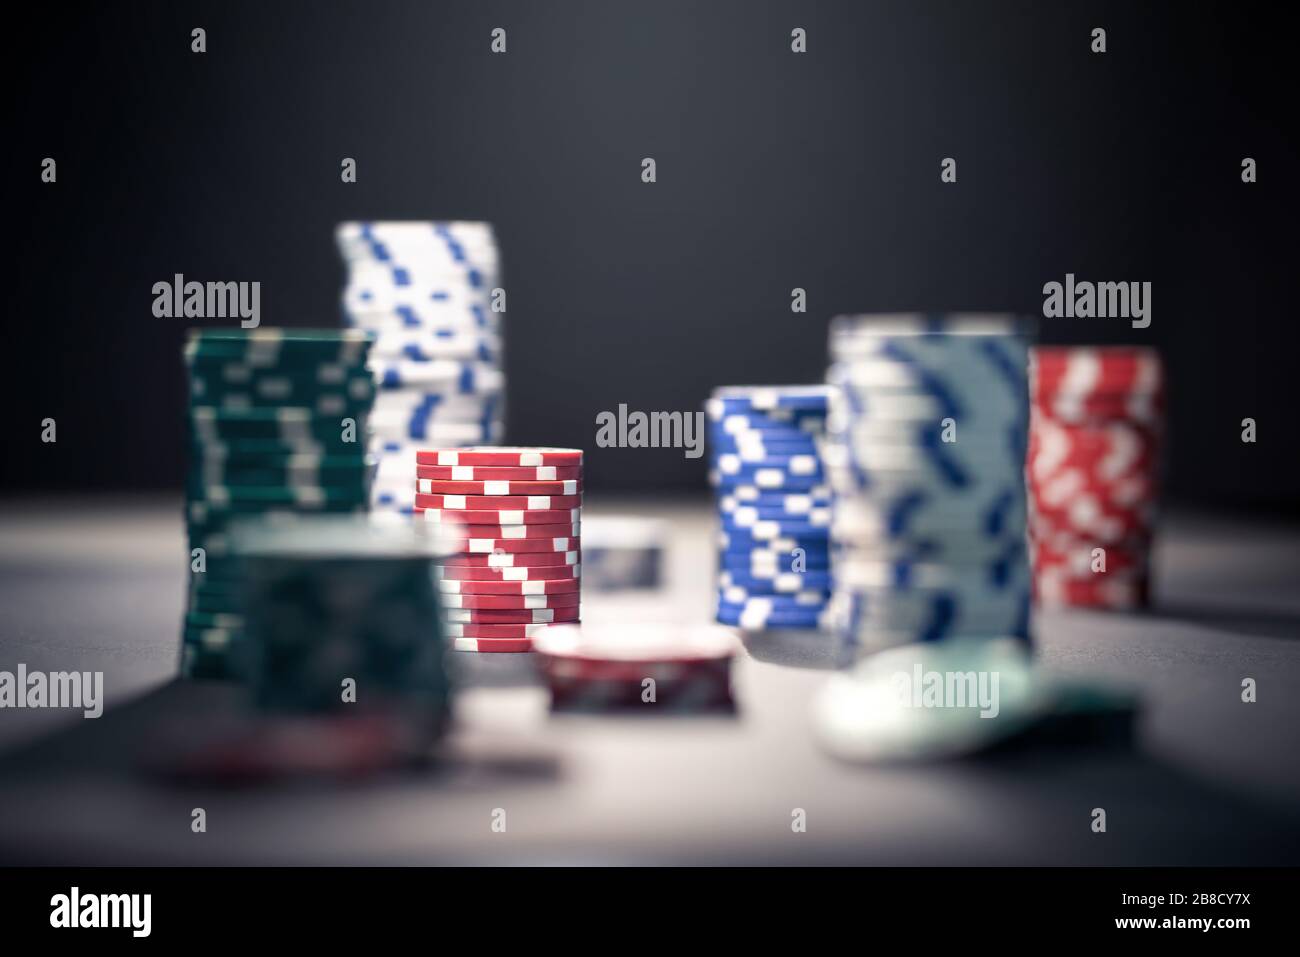 Casino poker chips in dramatic dark shadow or at night in spotlight. Stack of game money. Risk, luck and betting concept. Gambling problem. Stock Photo